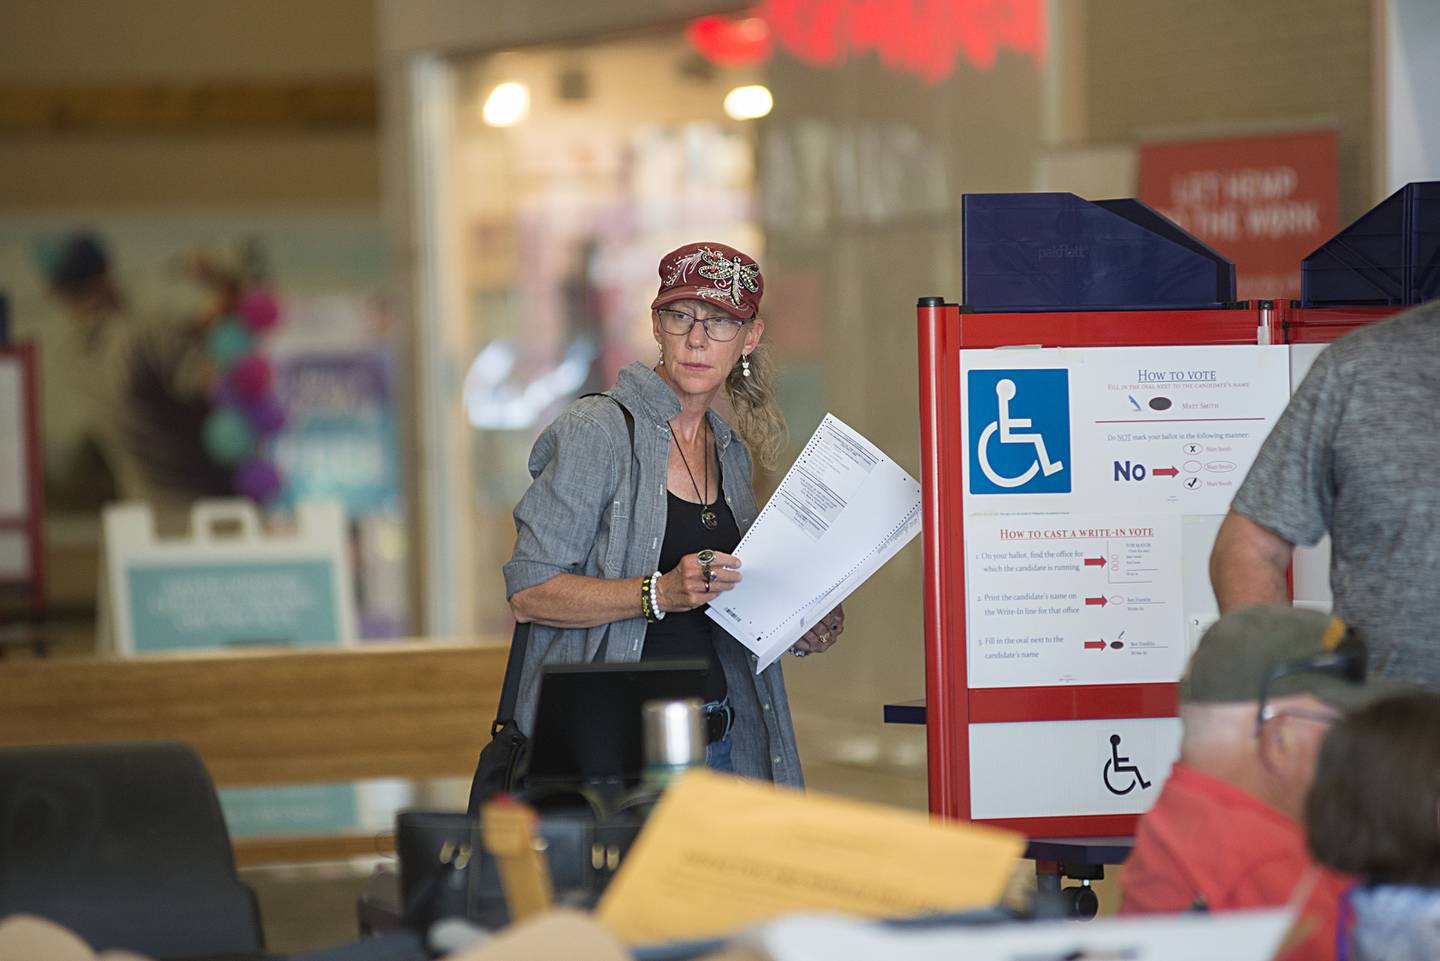 Theresa Hooper-Campos moves to file her ballot after voting Tuesday, June 28, 2022 at the mall in Sterling. The state of Illinois held their primary Tuesday.